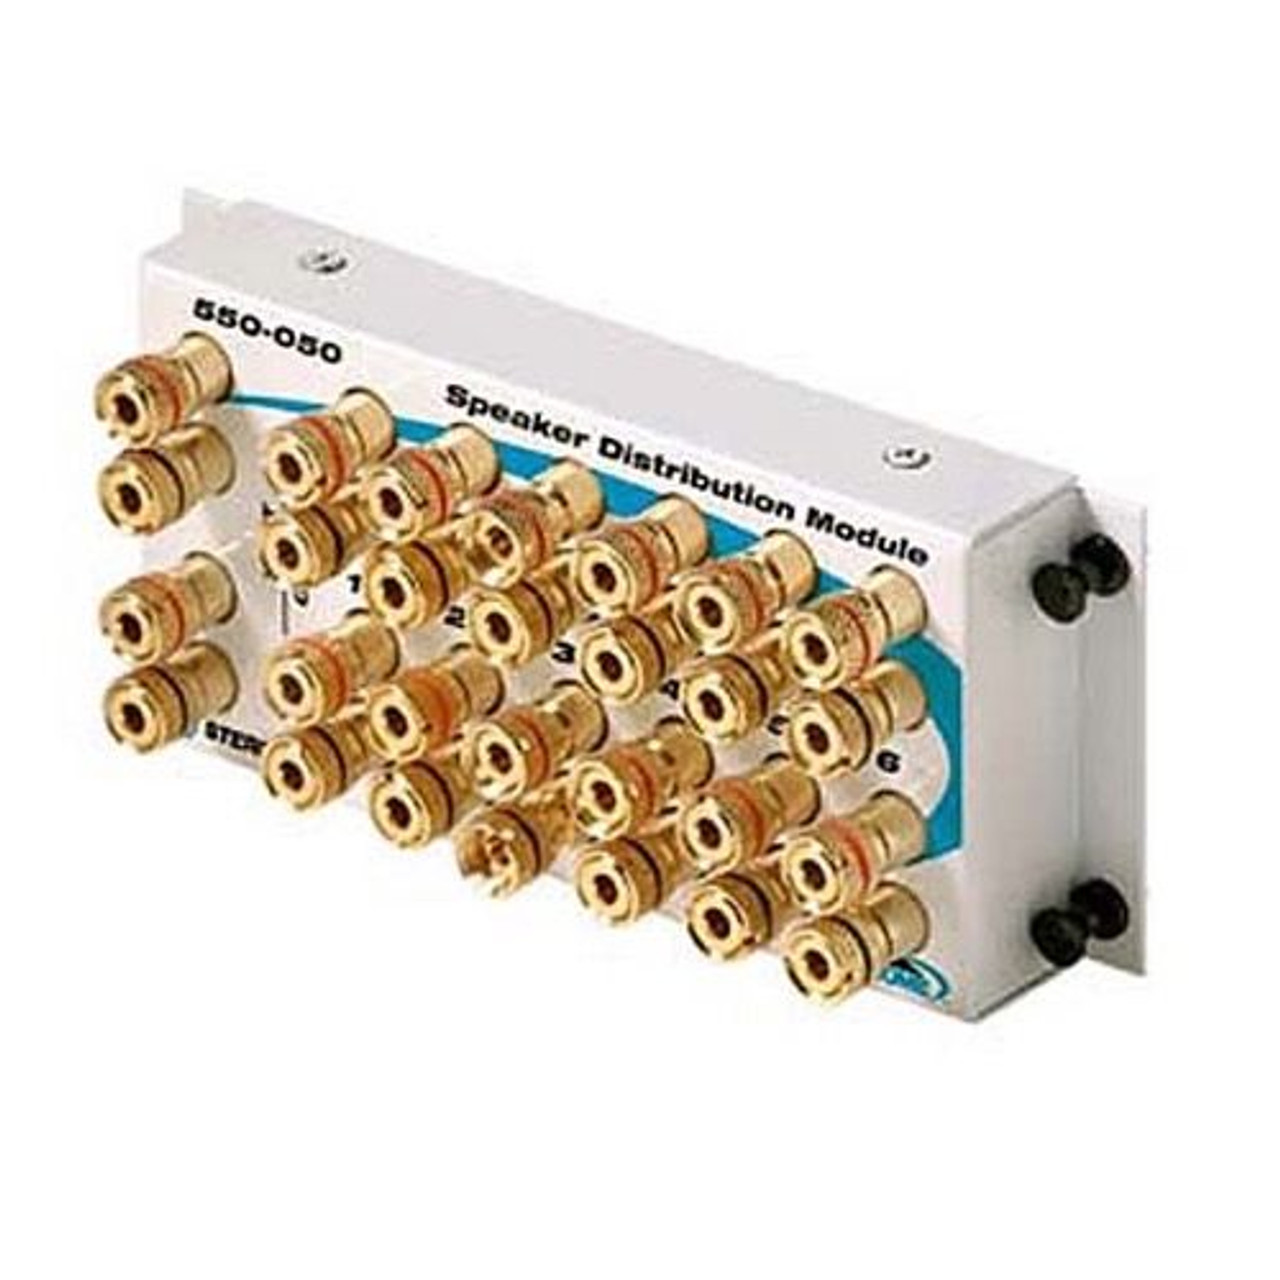 Steren 550-050 Fast Home Audio Splitter Module Distributes 2 Incoming Audio Channels to 6 Rooms Fast Media Speaker Audio Signal Distribution Module FastHome 18 Gauge Rolled White Painted Steel, Part # 550050